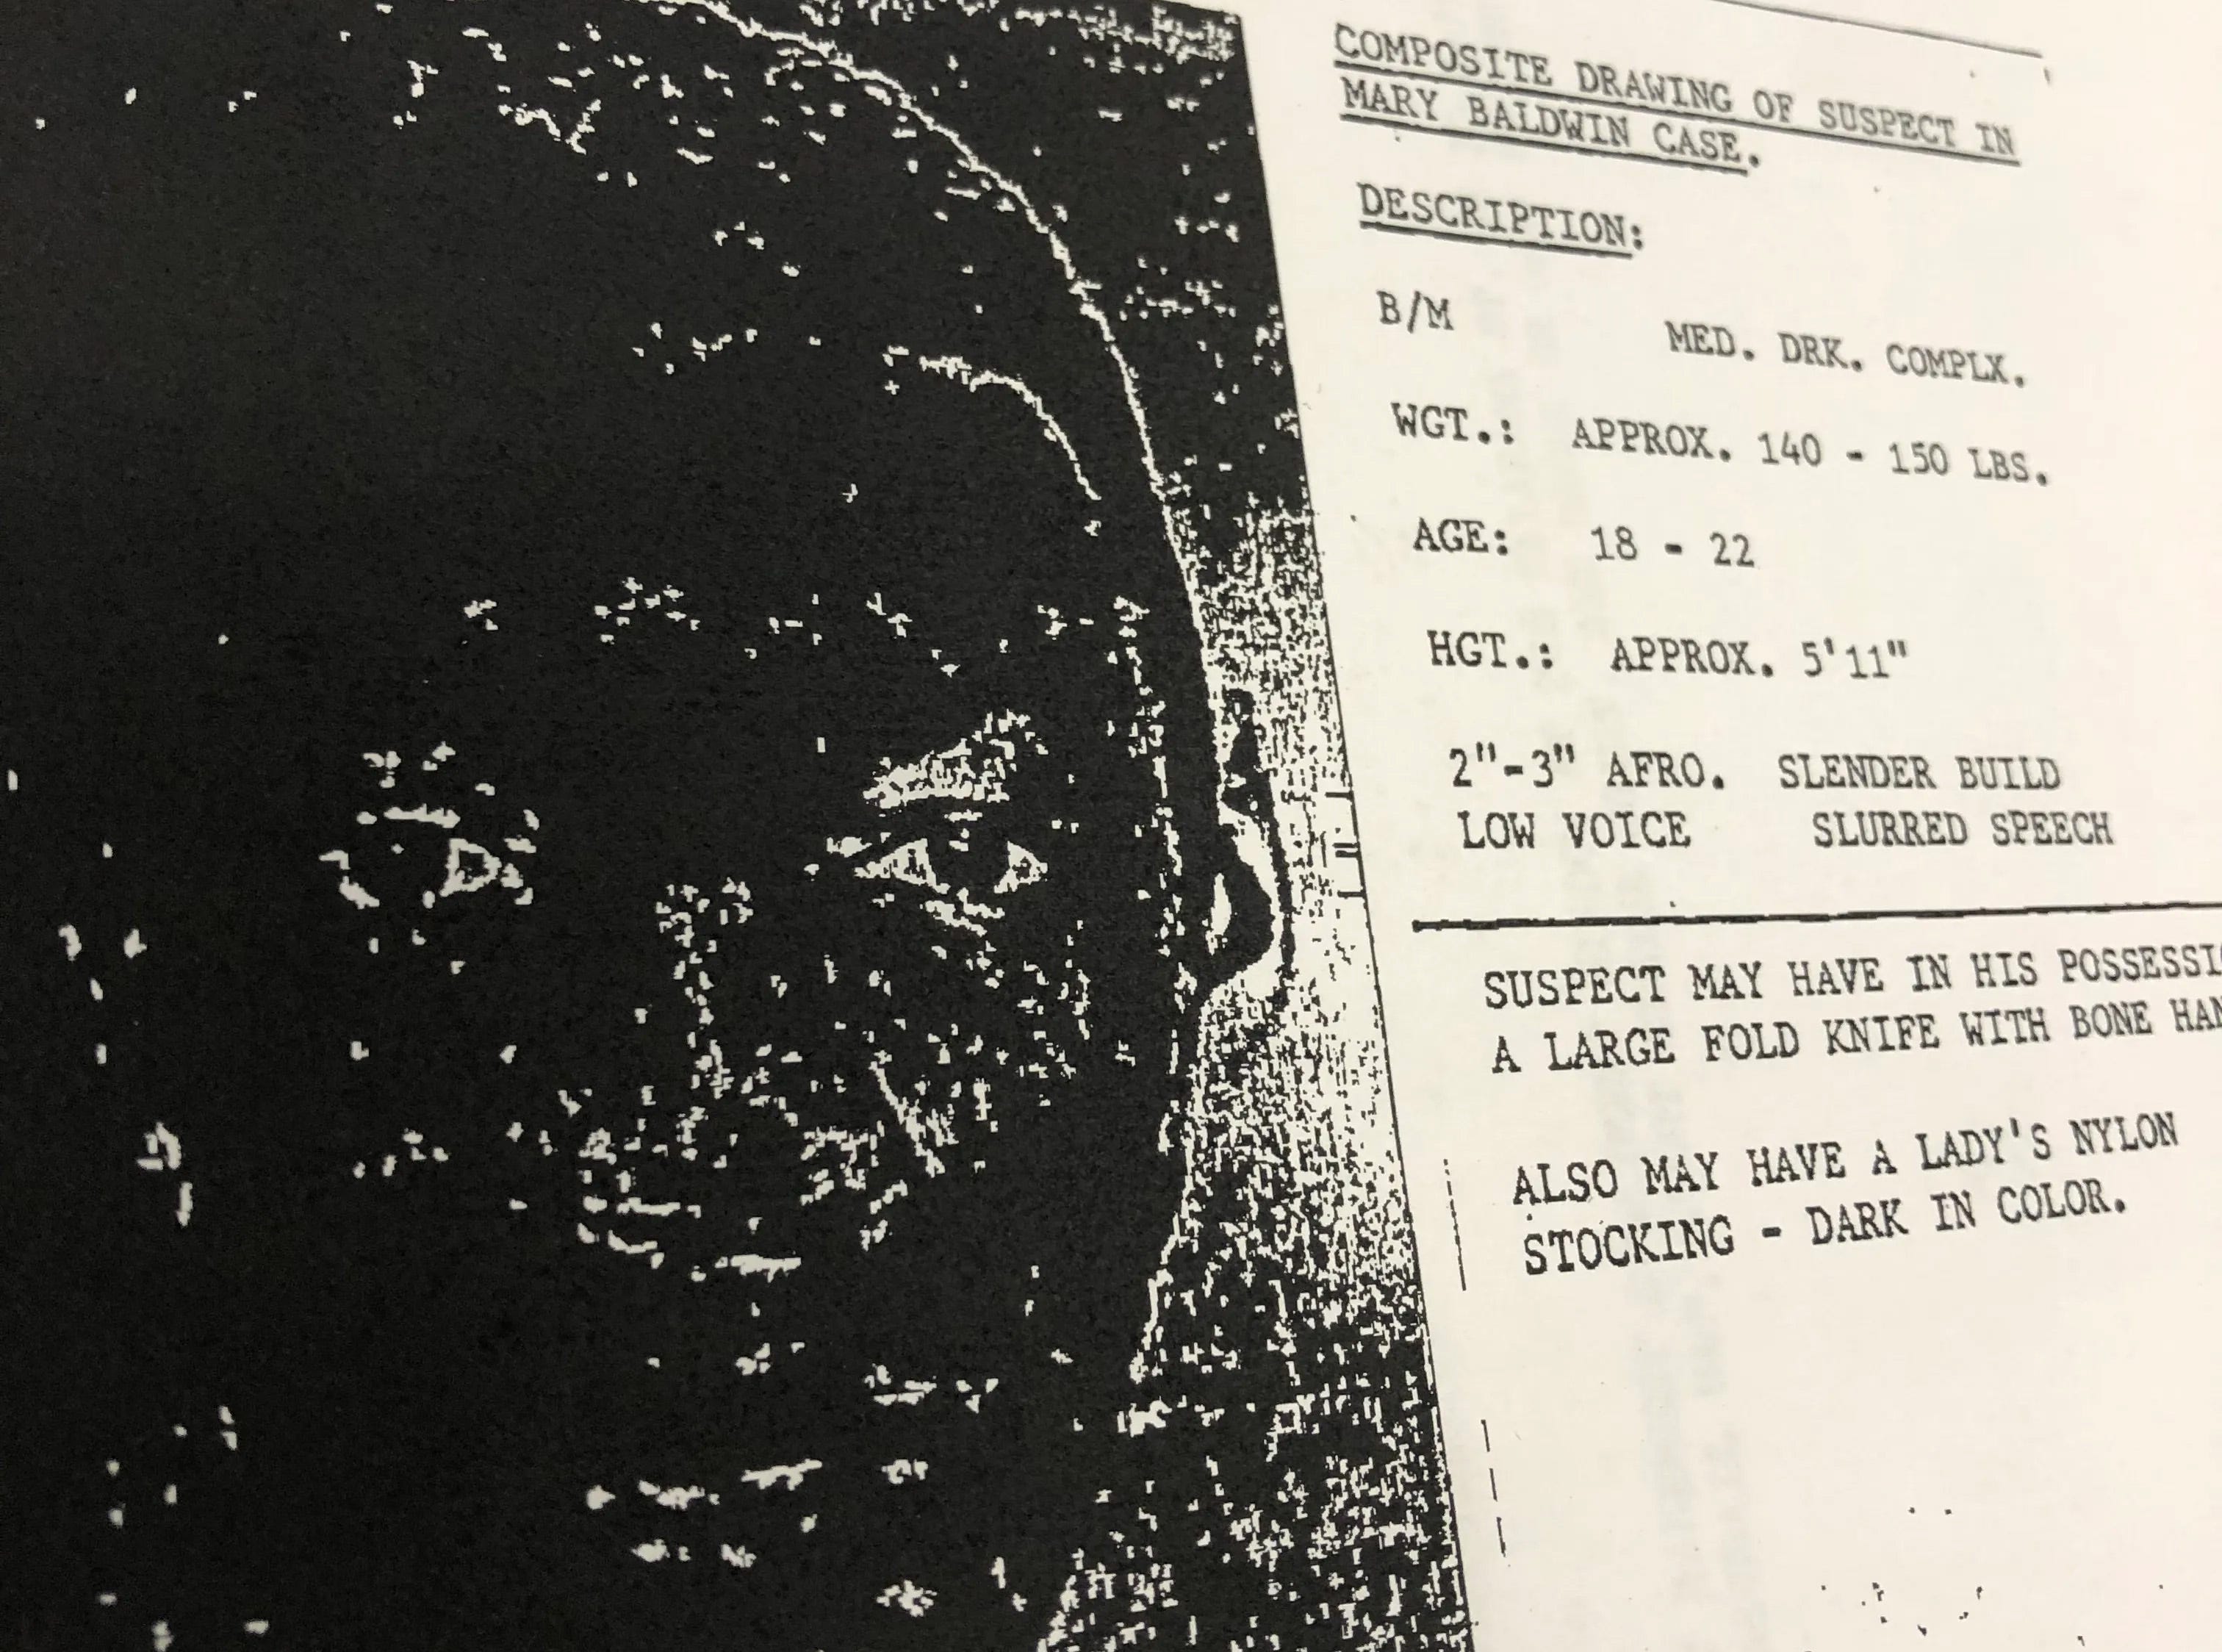 One of several composite sketches developed in 1979 for the Staunton Police. From the final report of the Virginia State Police's Special Agent.